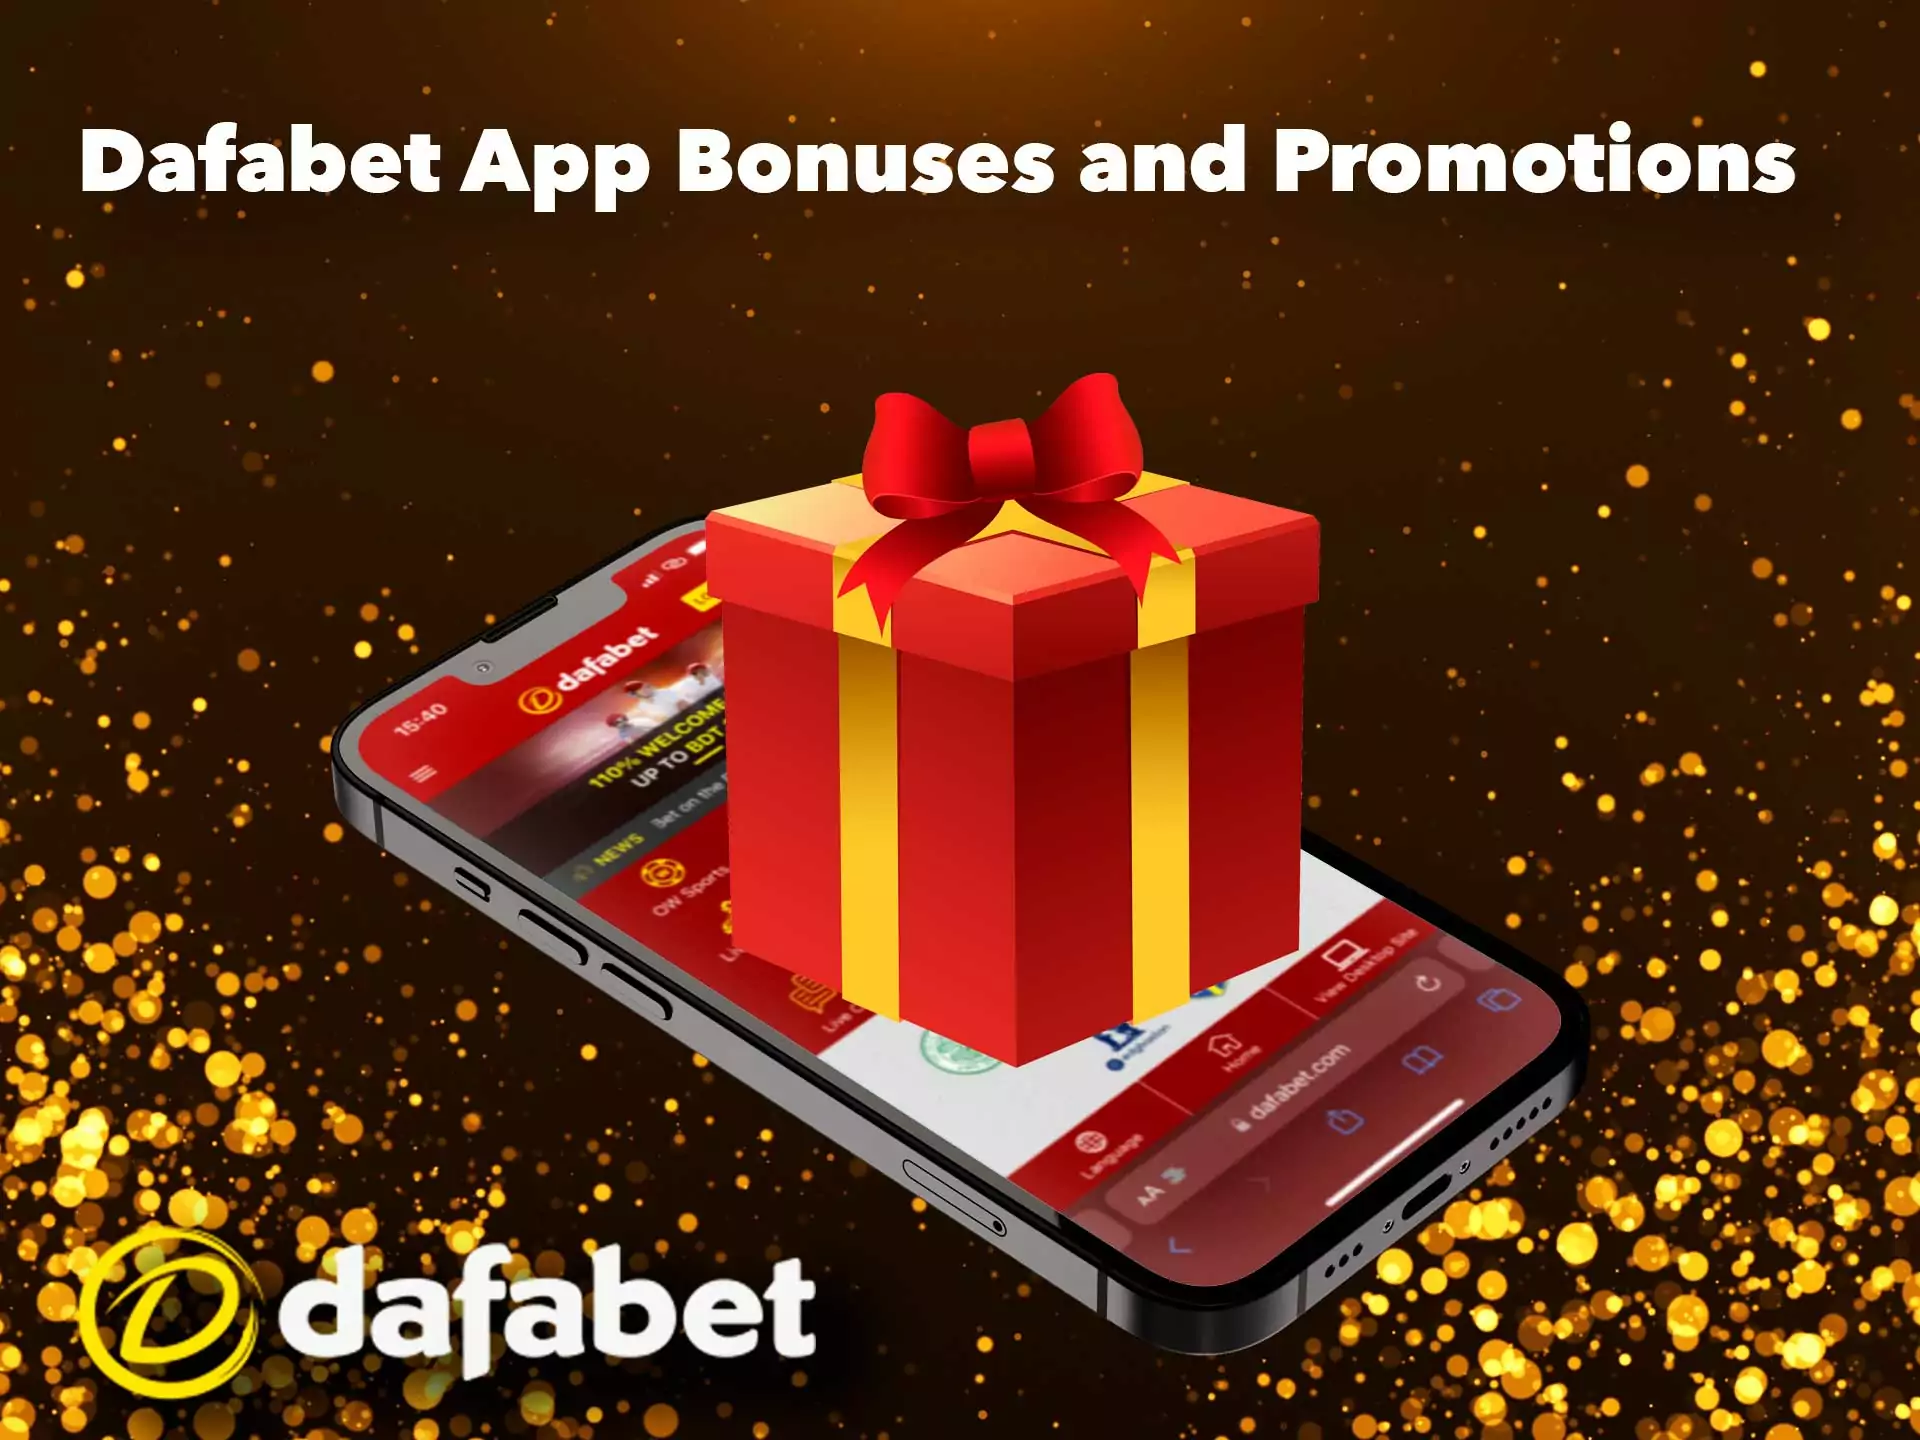 15 bonuses and promotions, everyone will find something useful in Dafabet app.